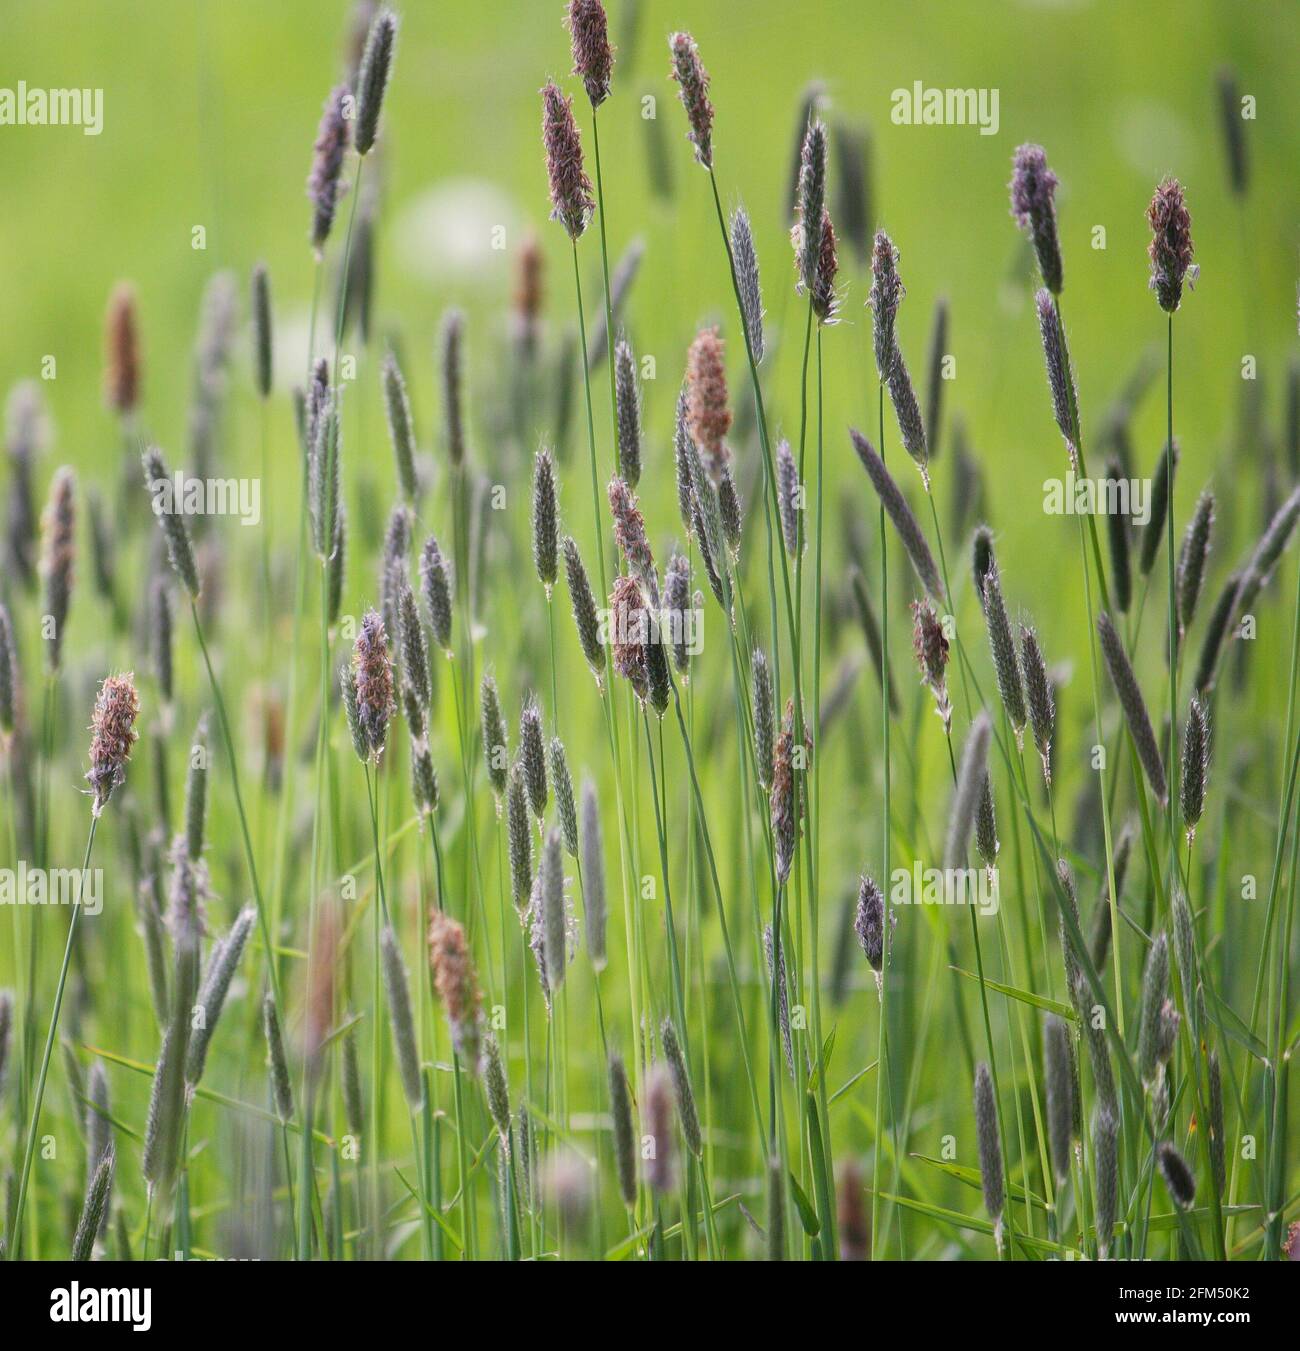 Alopecurus pratensis, also known as Meadow foxtail or Field foxtail, a grass with purple-coloured flower spikes. Square format. Stock Photo